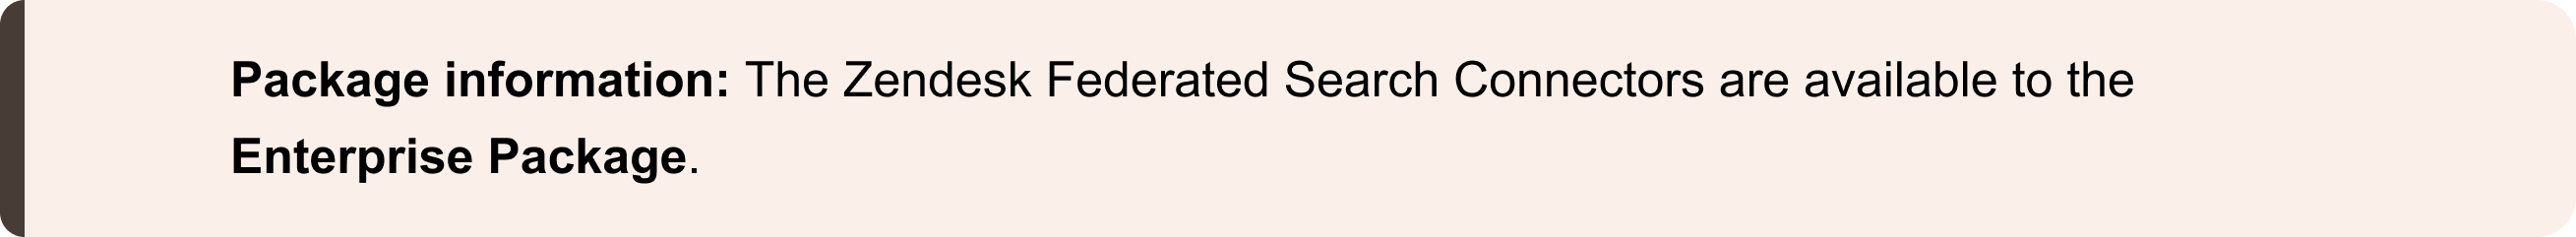 Zendesk_Federated_Search_Connectors_1.png